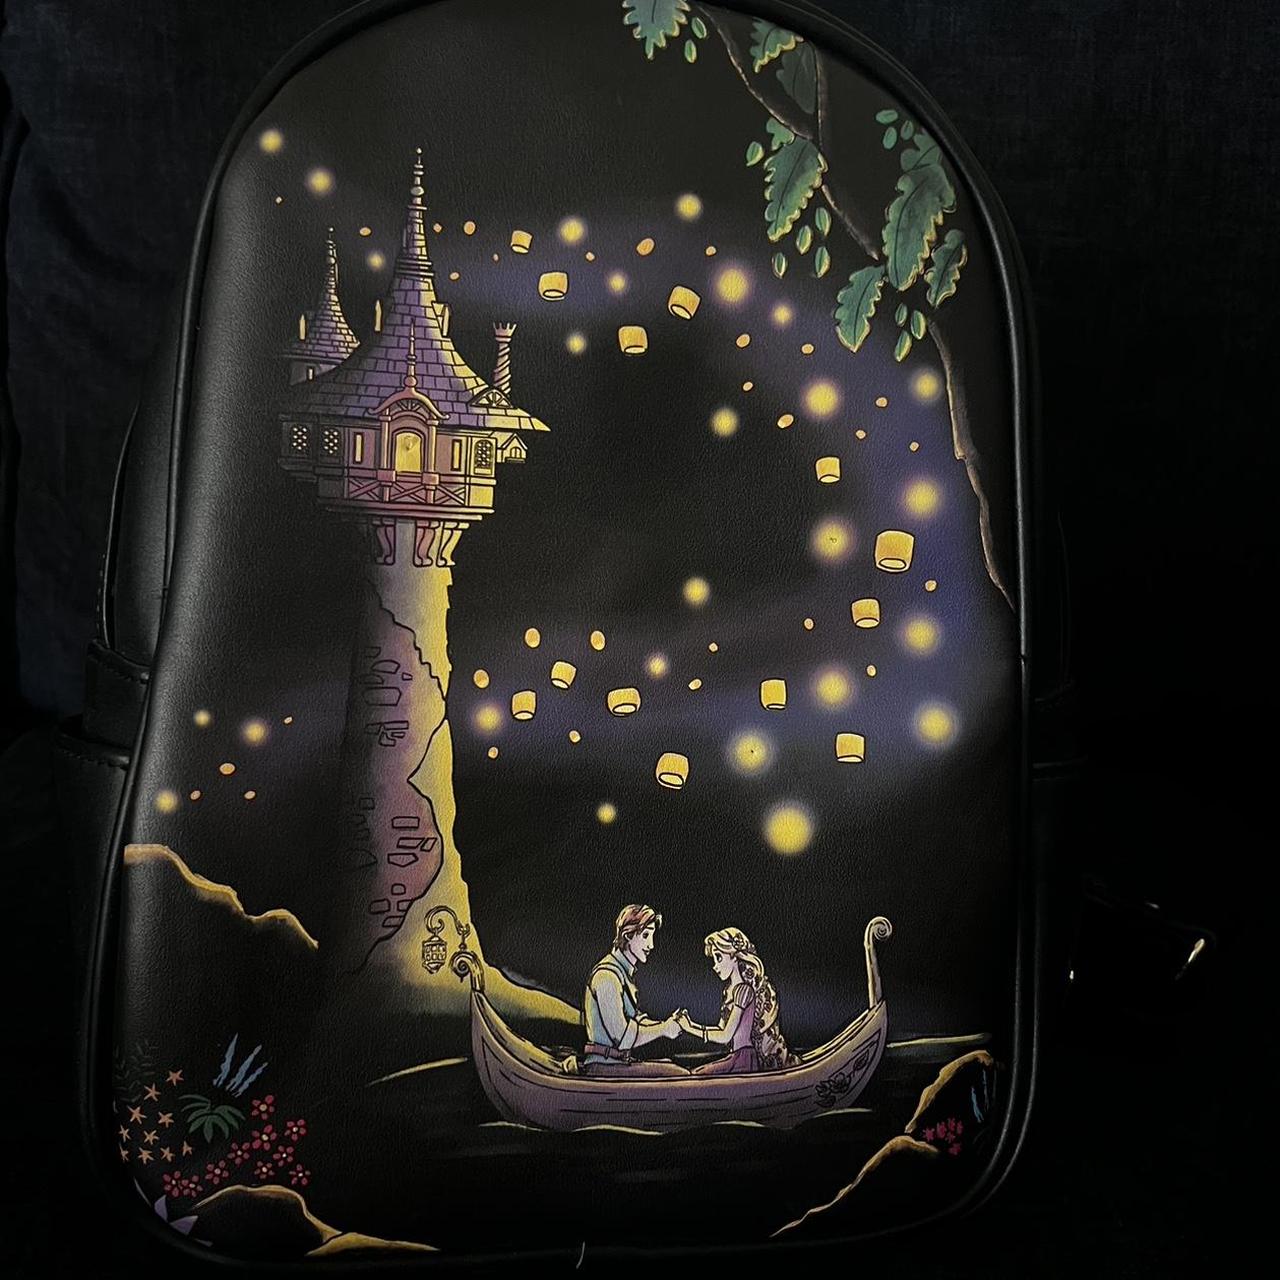 Disney Loungefly Tangled Tower backpack and card - Depop